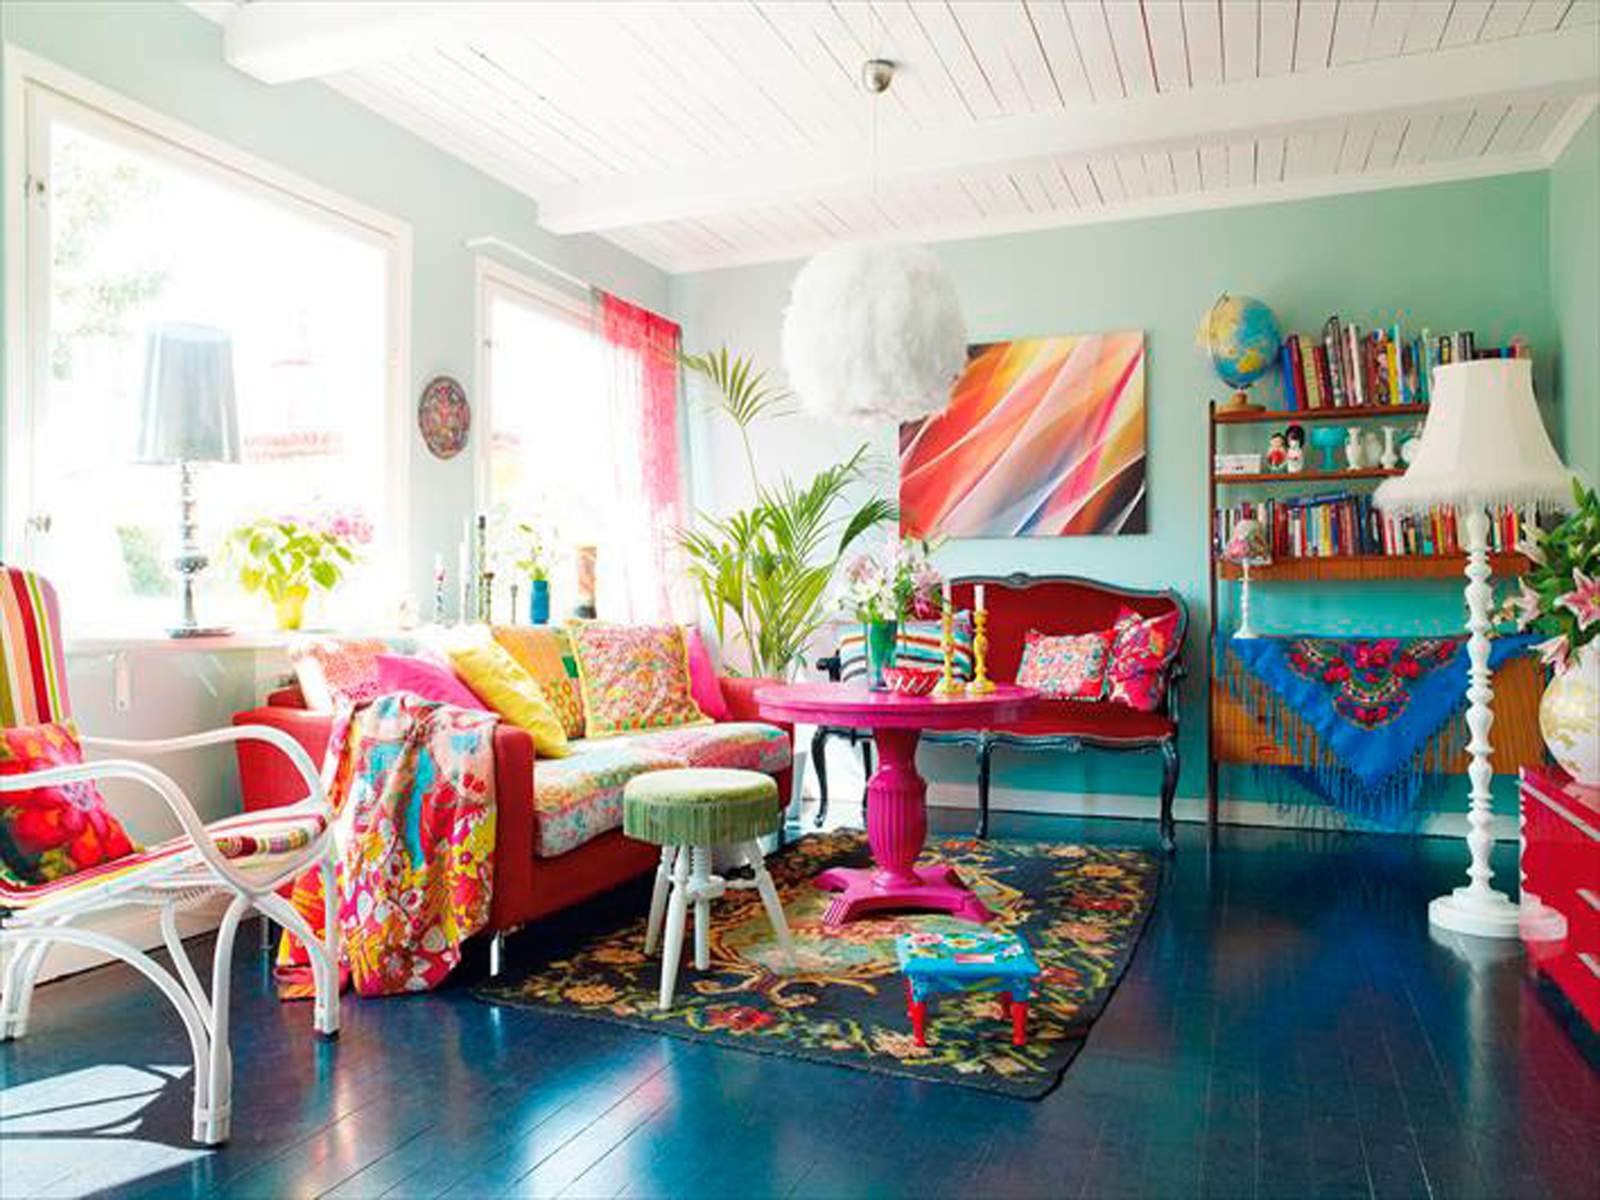 Top 17 Colorful Decorating Ideas With Photos